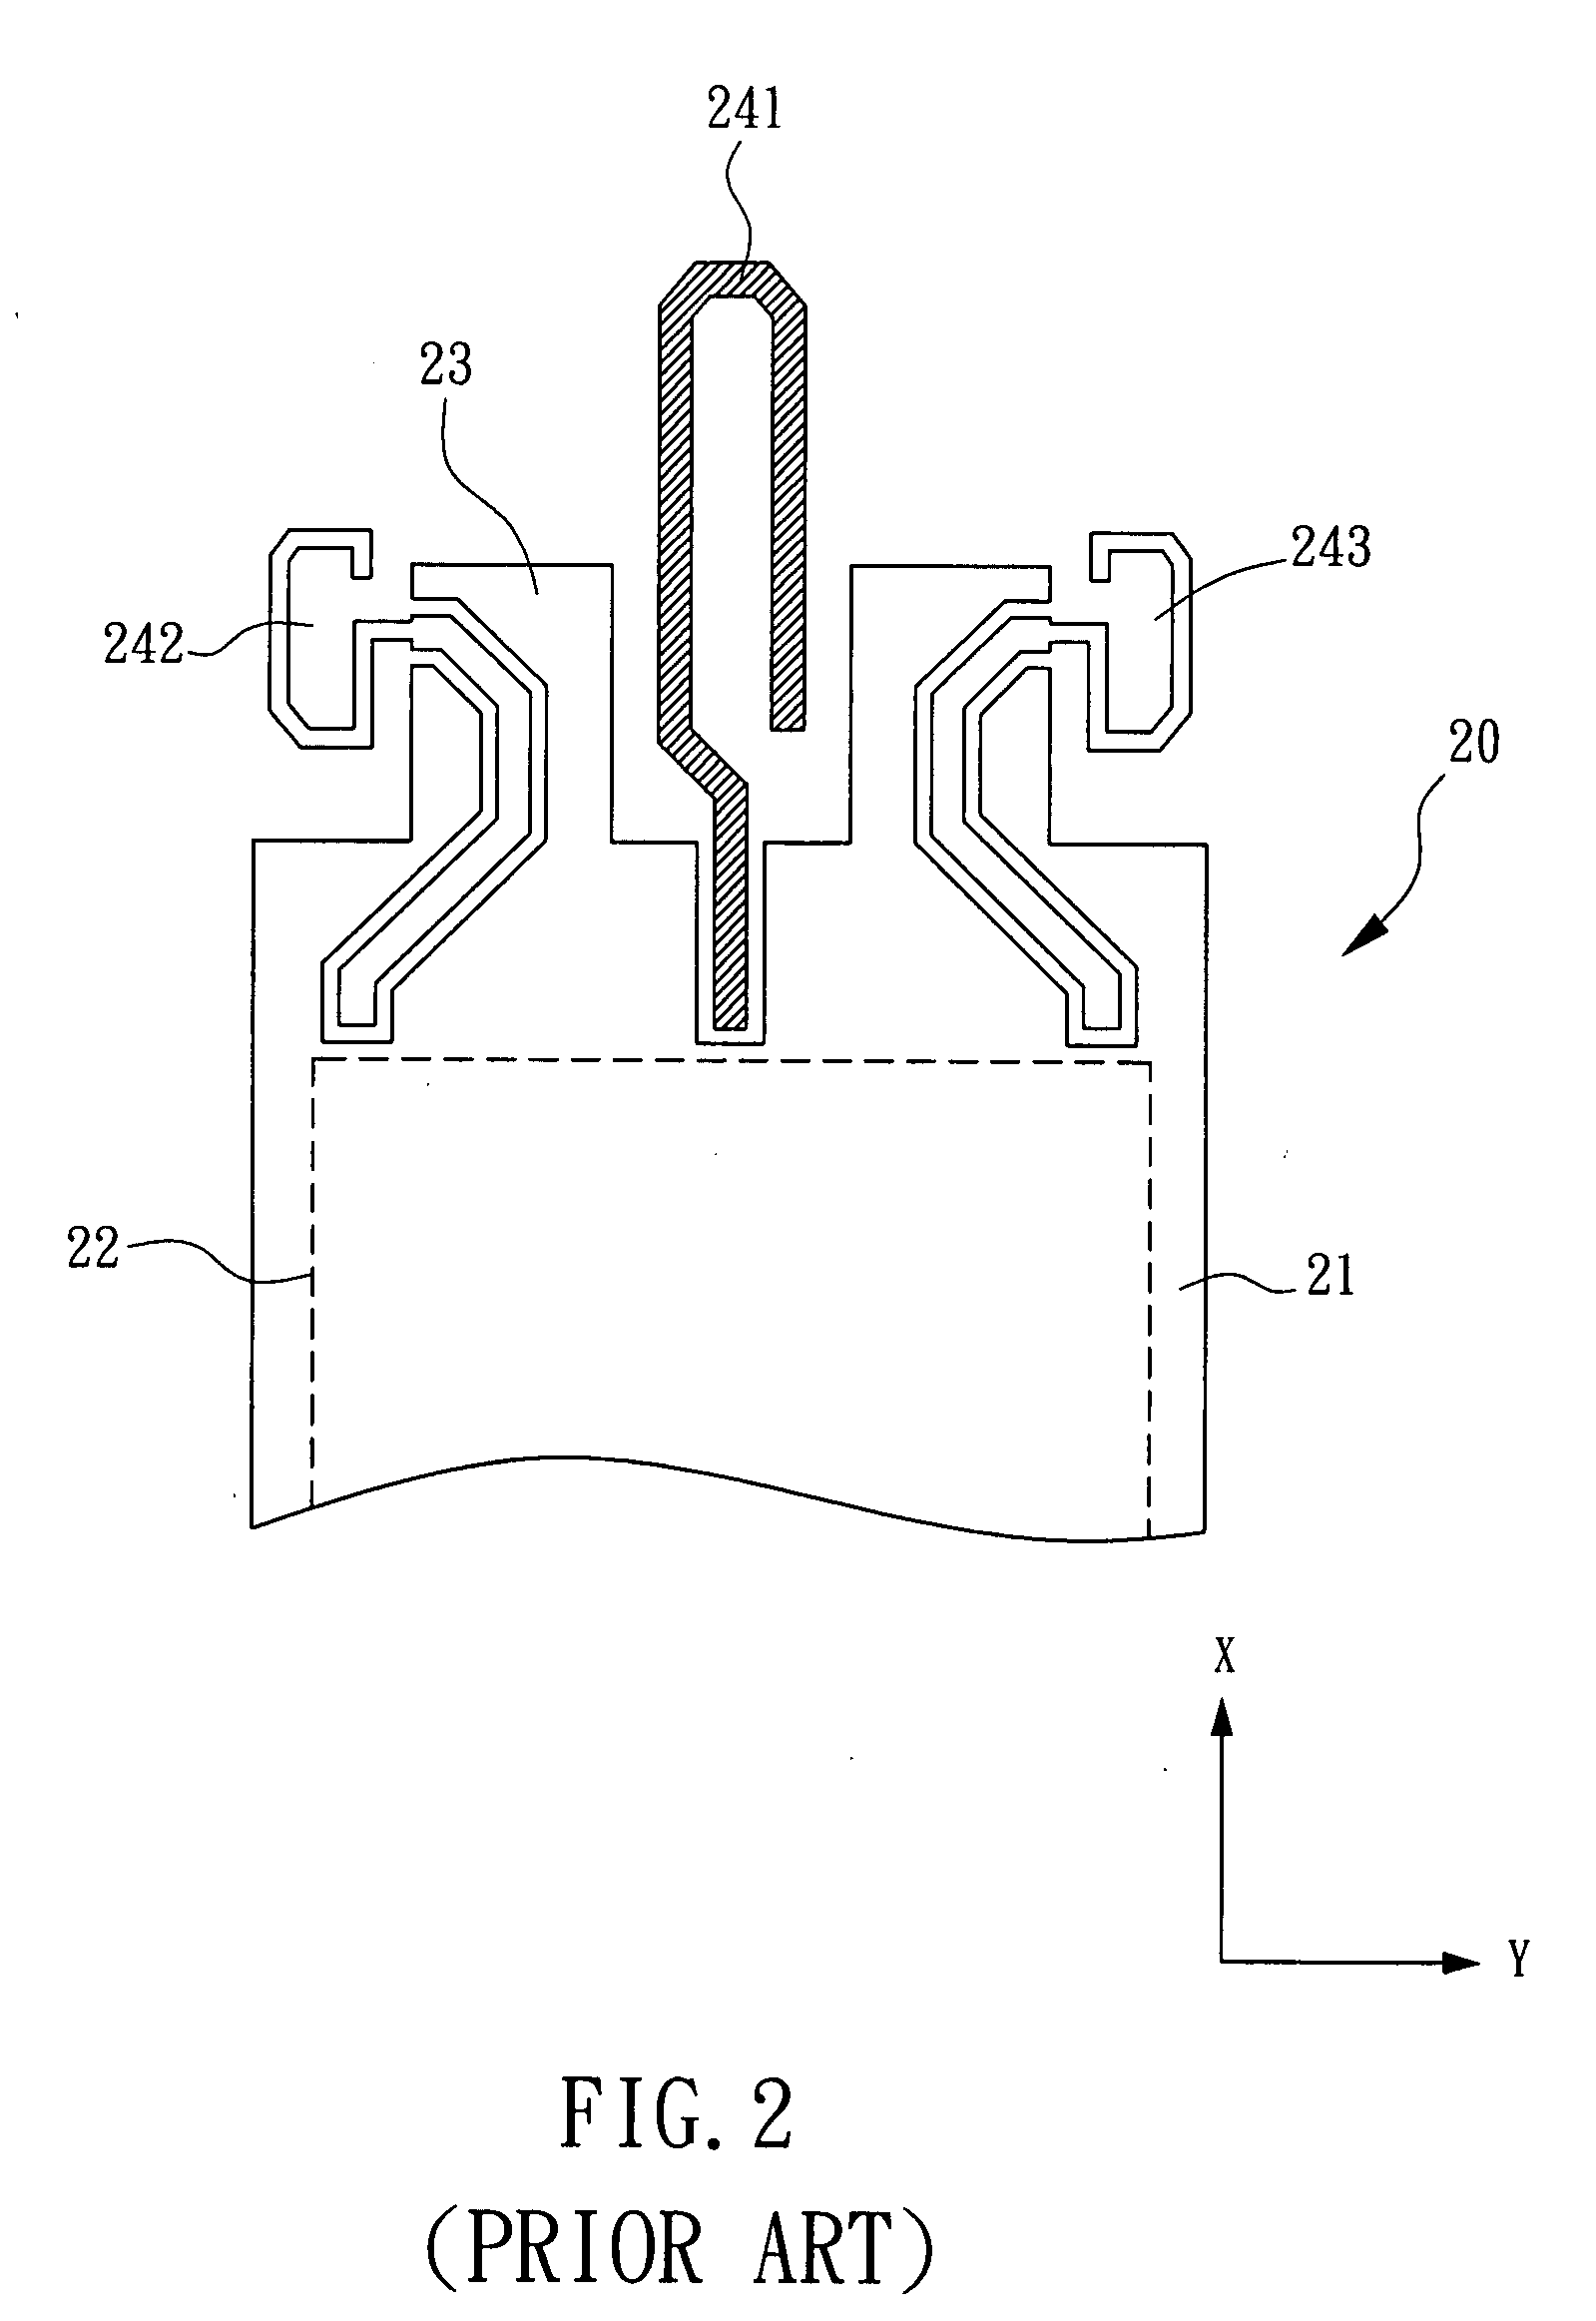 Antenna and wireless network device having the same